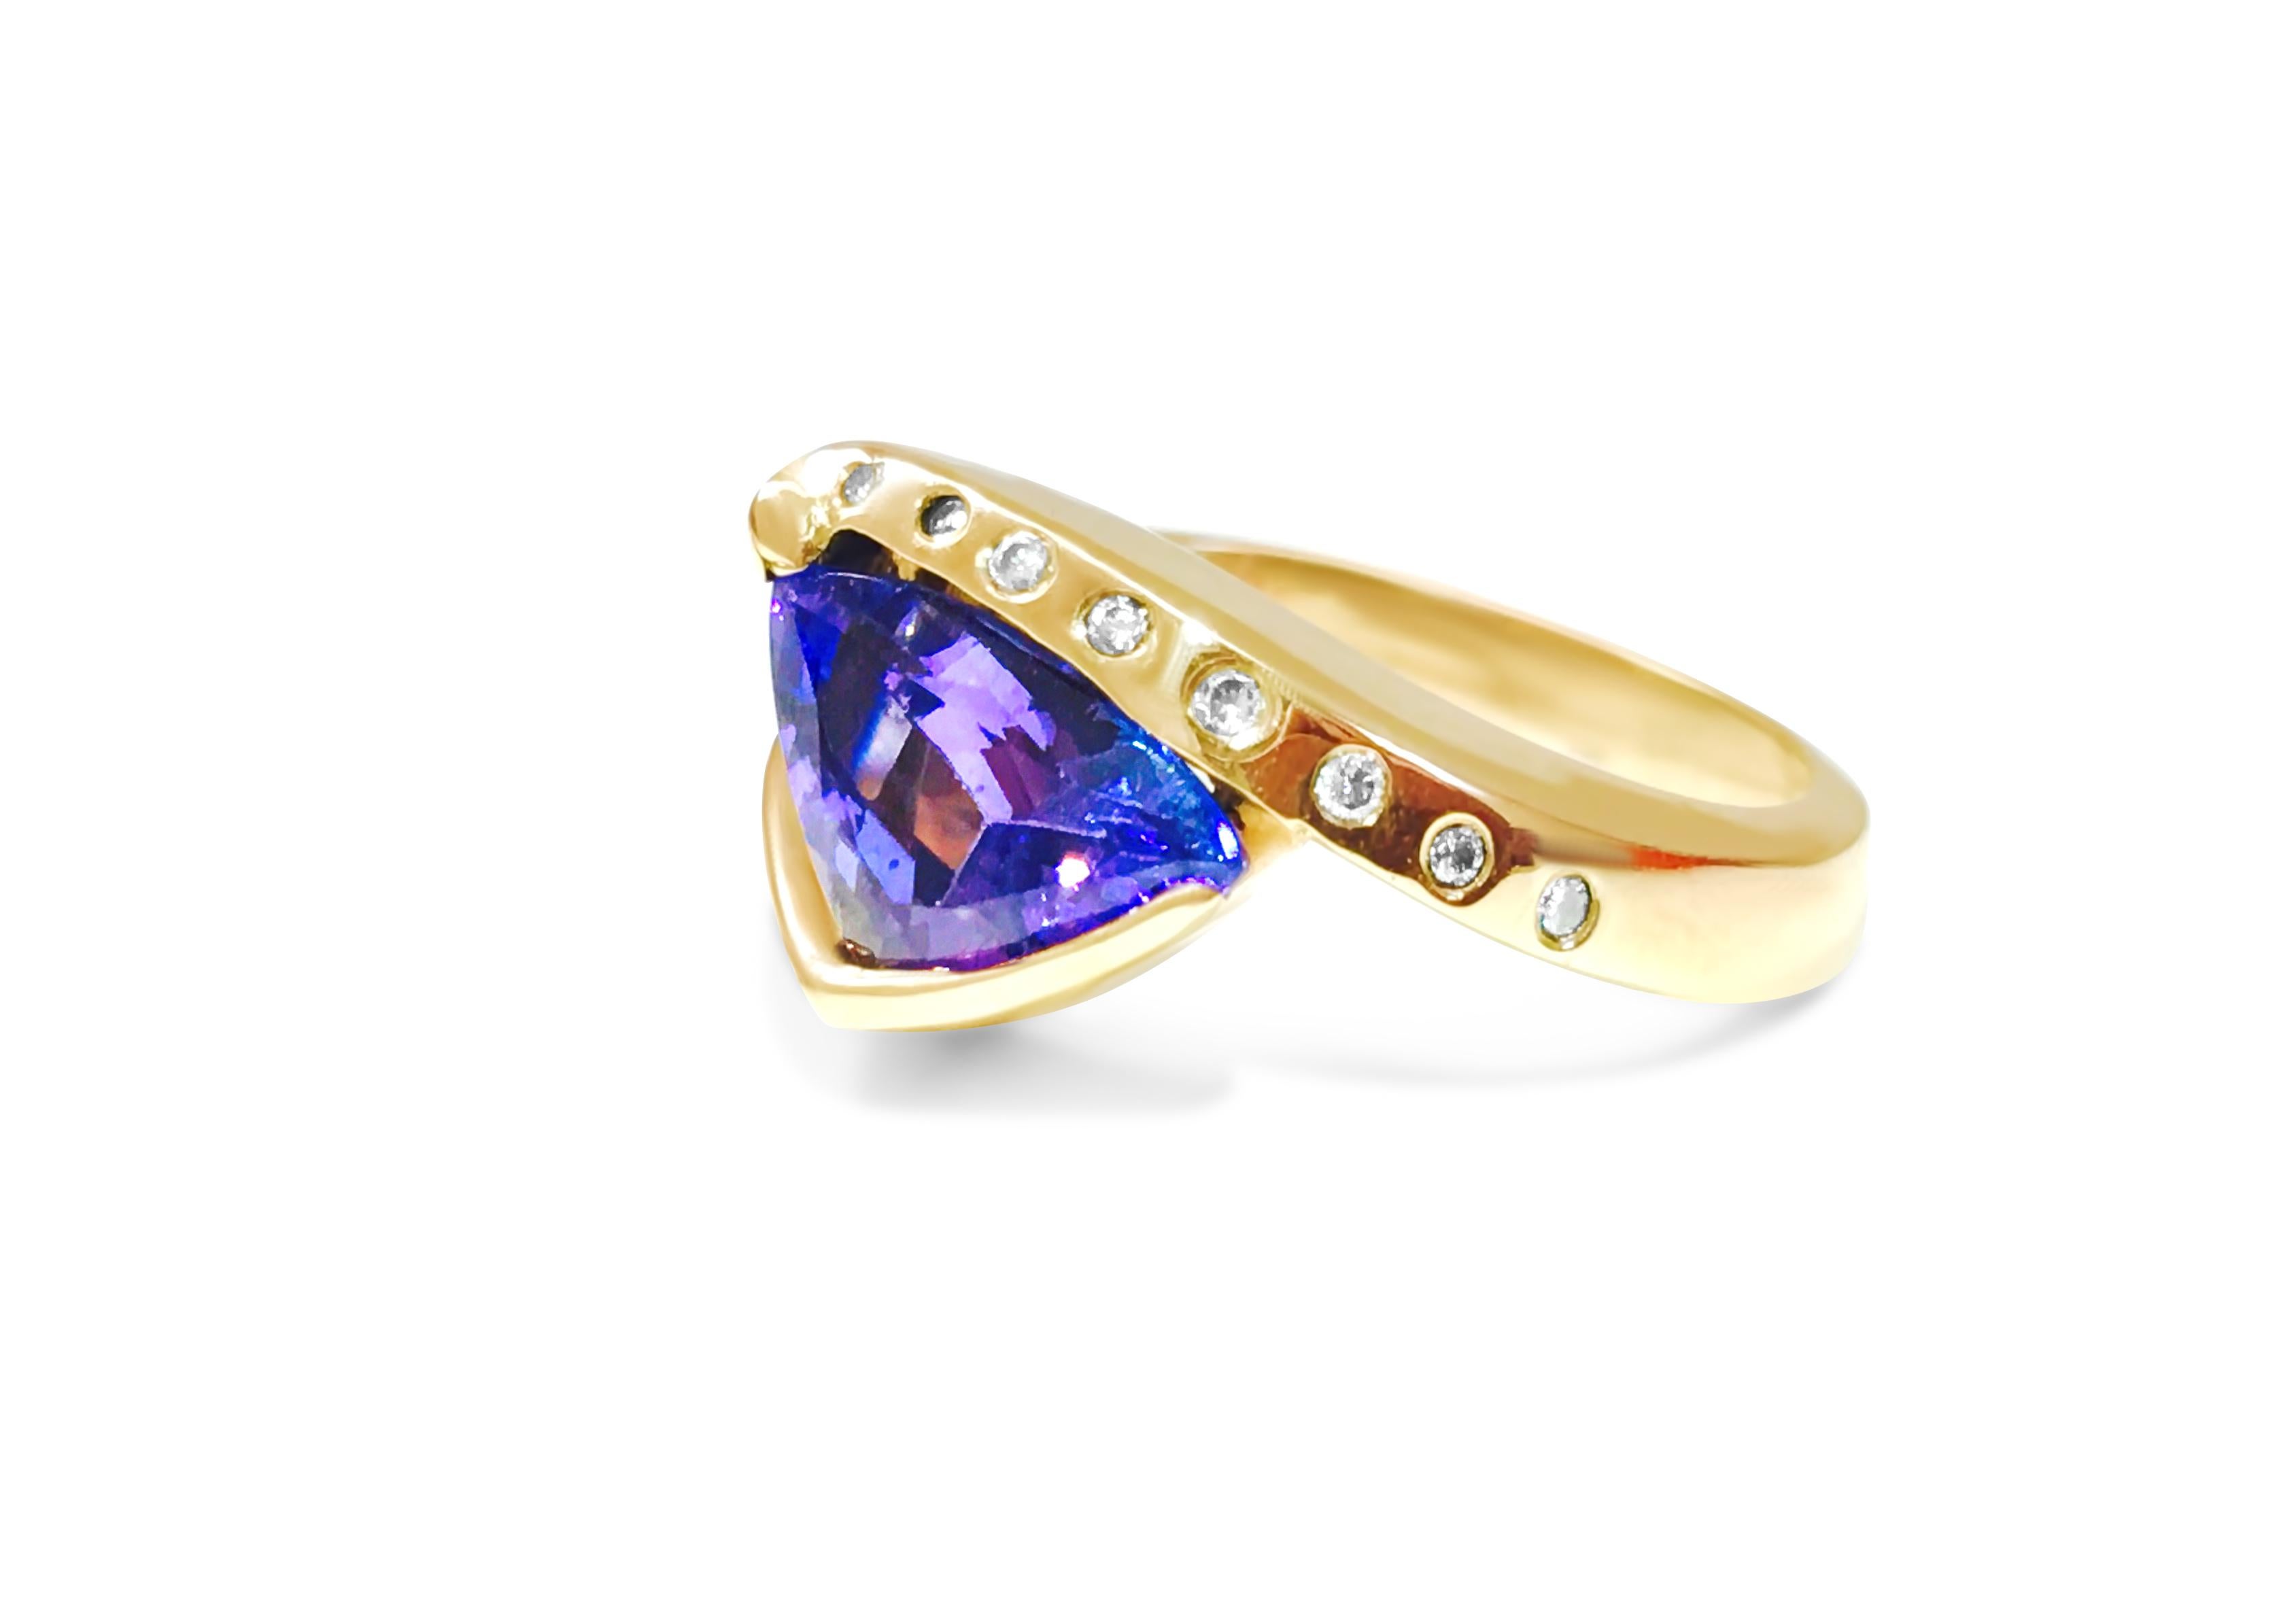 14k yellow gold, tanzanite and diamond ring.
Round brilliant cut diamonds.
For Women.
VS-SI clarity and G color diamonds.
Tanzanite is a trade name that was first used by Tiffany and Company for gem-quality specimens of the mineral zoisite with a